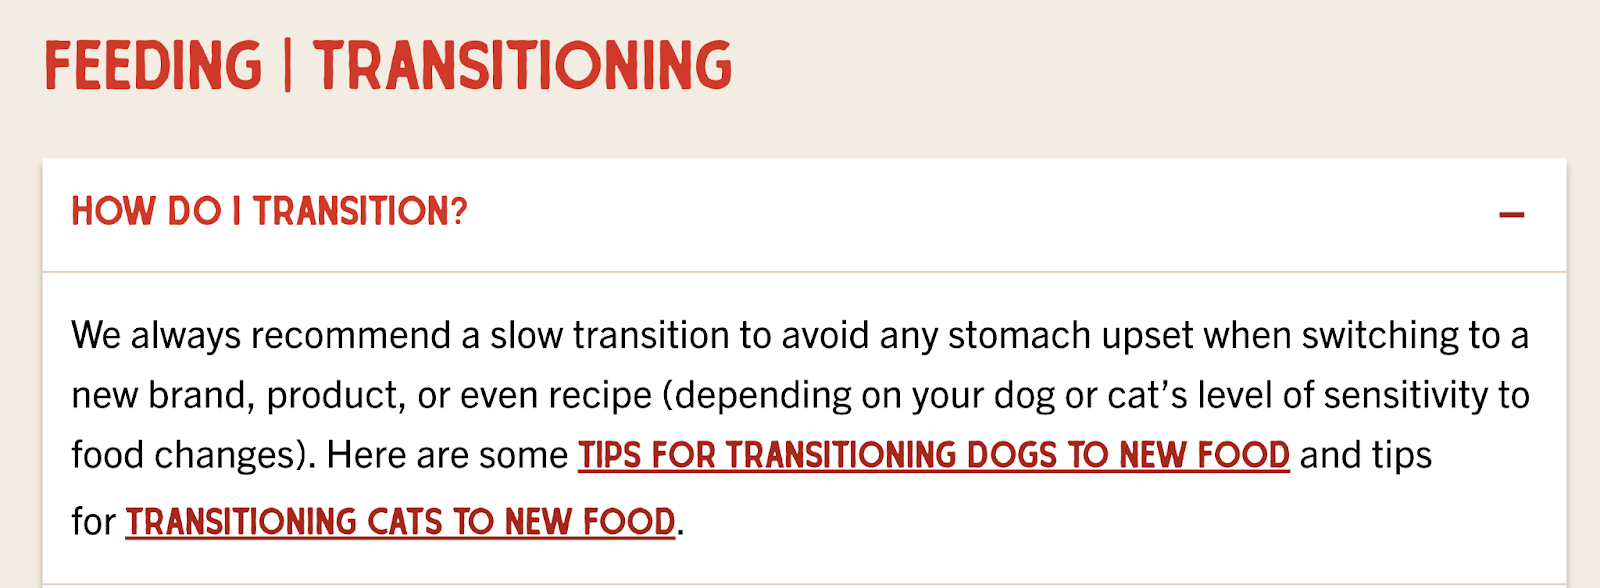 Brand links to tips pages to walk animal owners through transitioning pet friends to new food